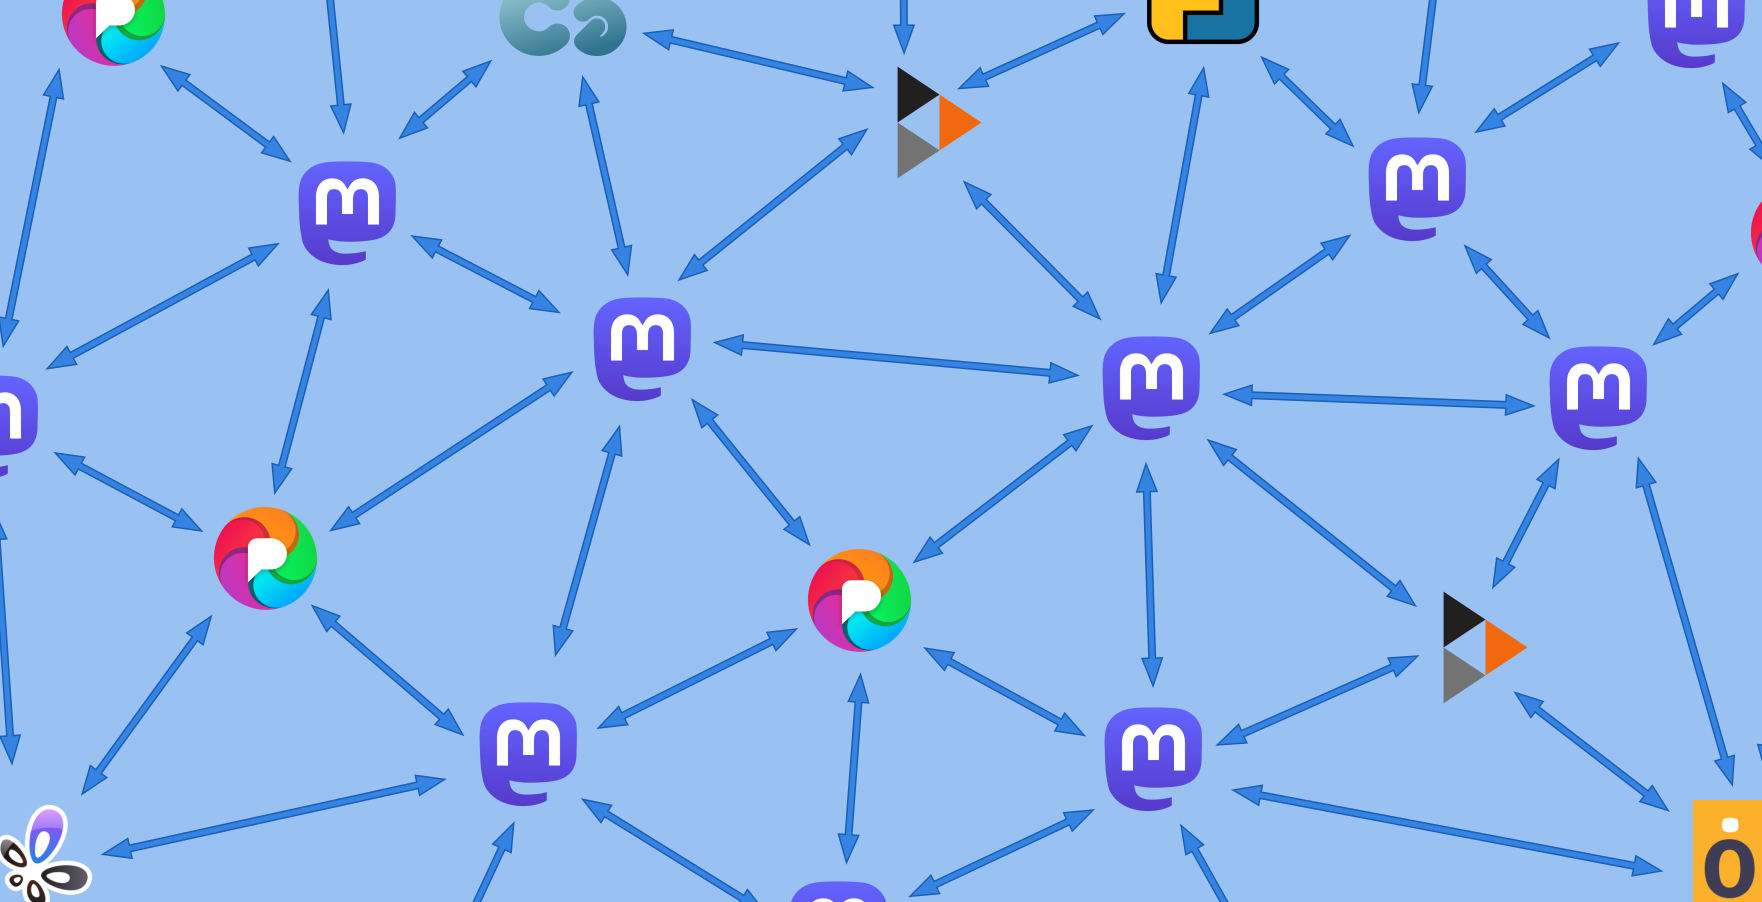 Fediverse software icons form nodes joined in a network by arrows